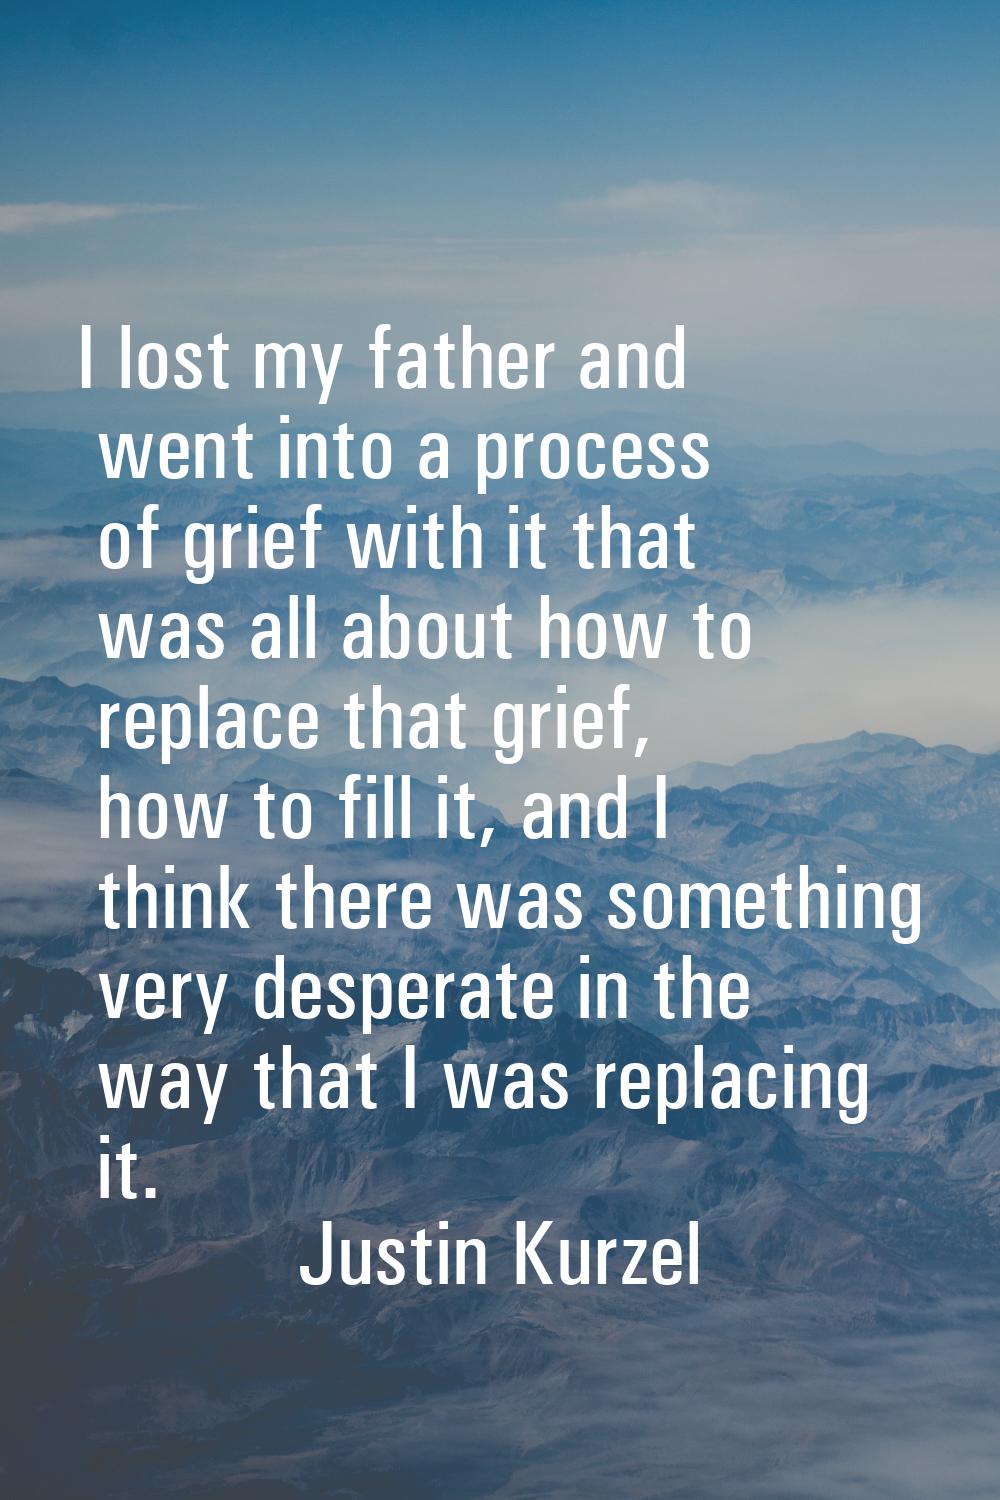 I lost my father and went into a process of grief with it that was all about how to replace that gr